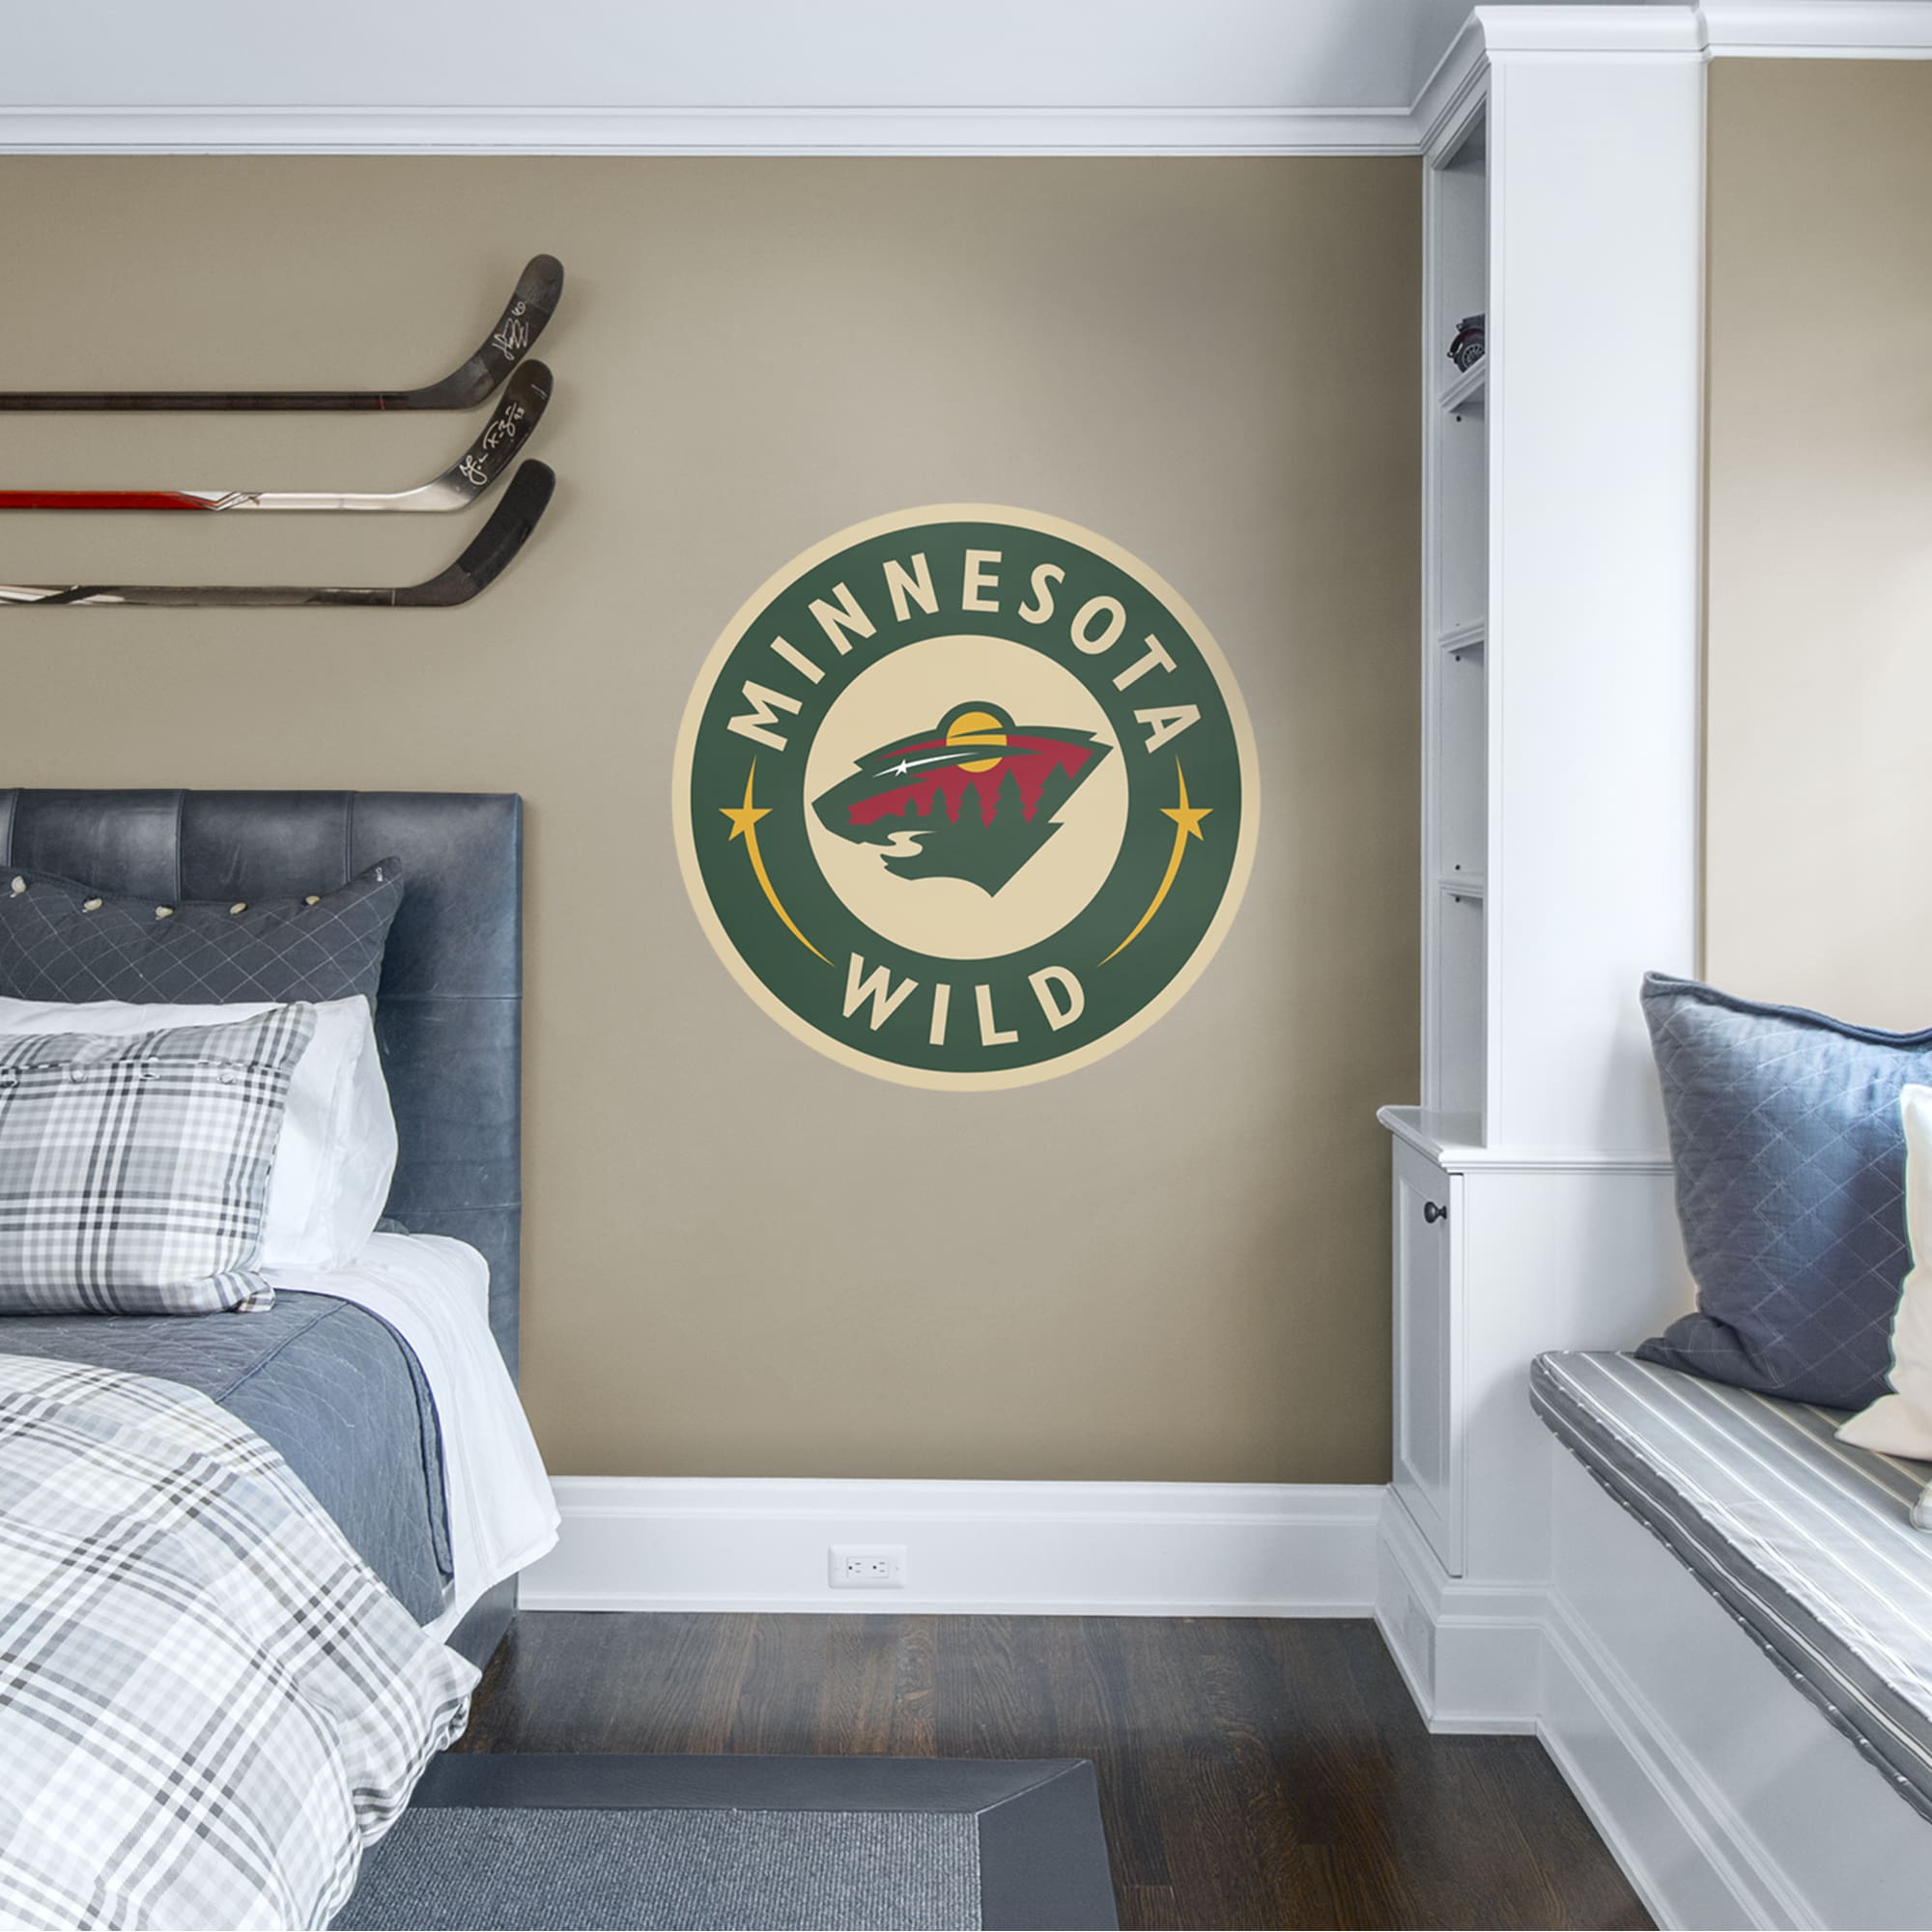 Minnesota Wild: Alternate Logo - Officially Licensed NHL Removable Wall Decal Giant Logo (38"W x 38"H) by Fathead | Vinyl